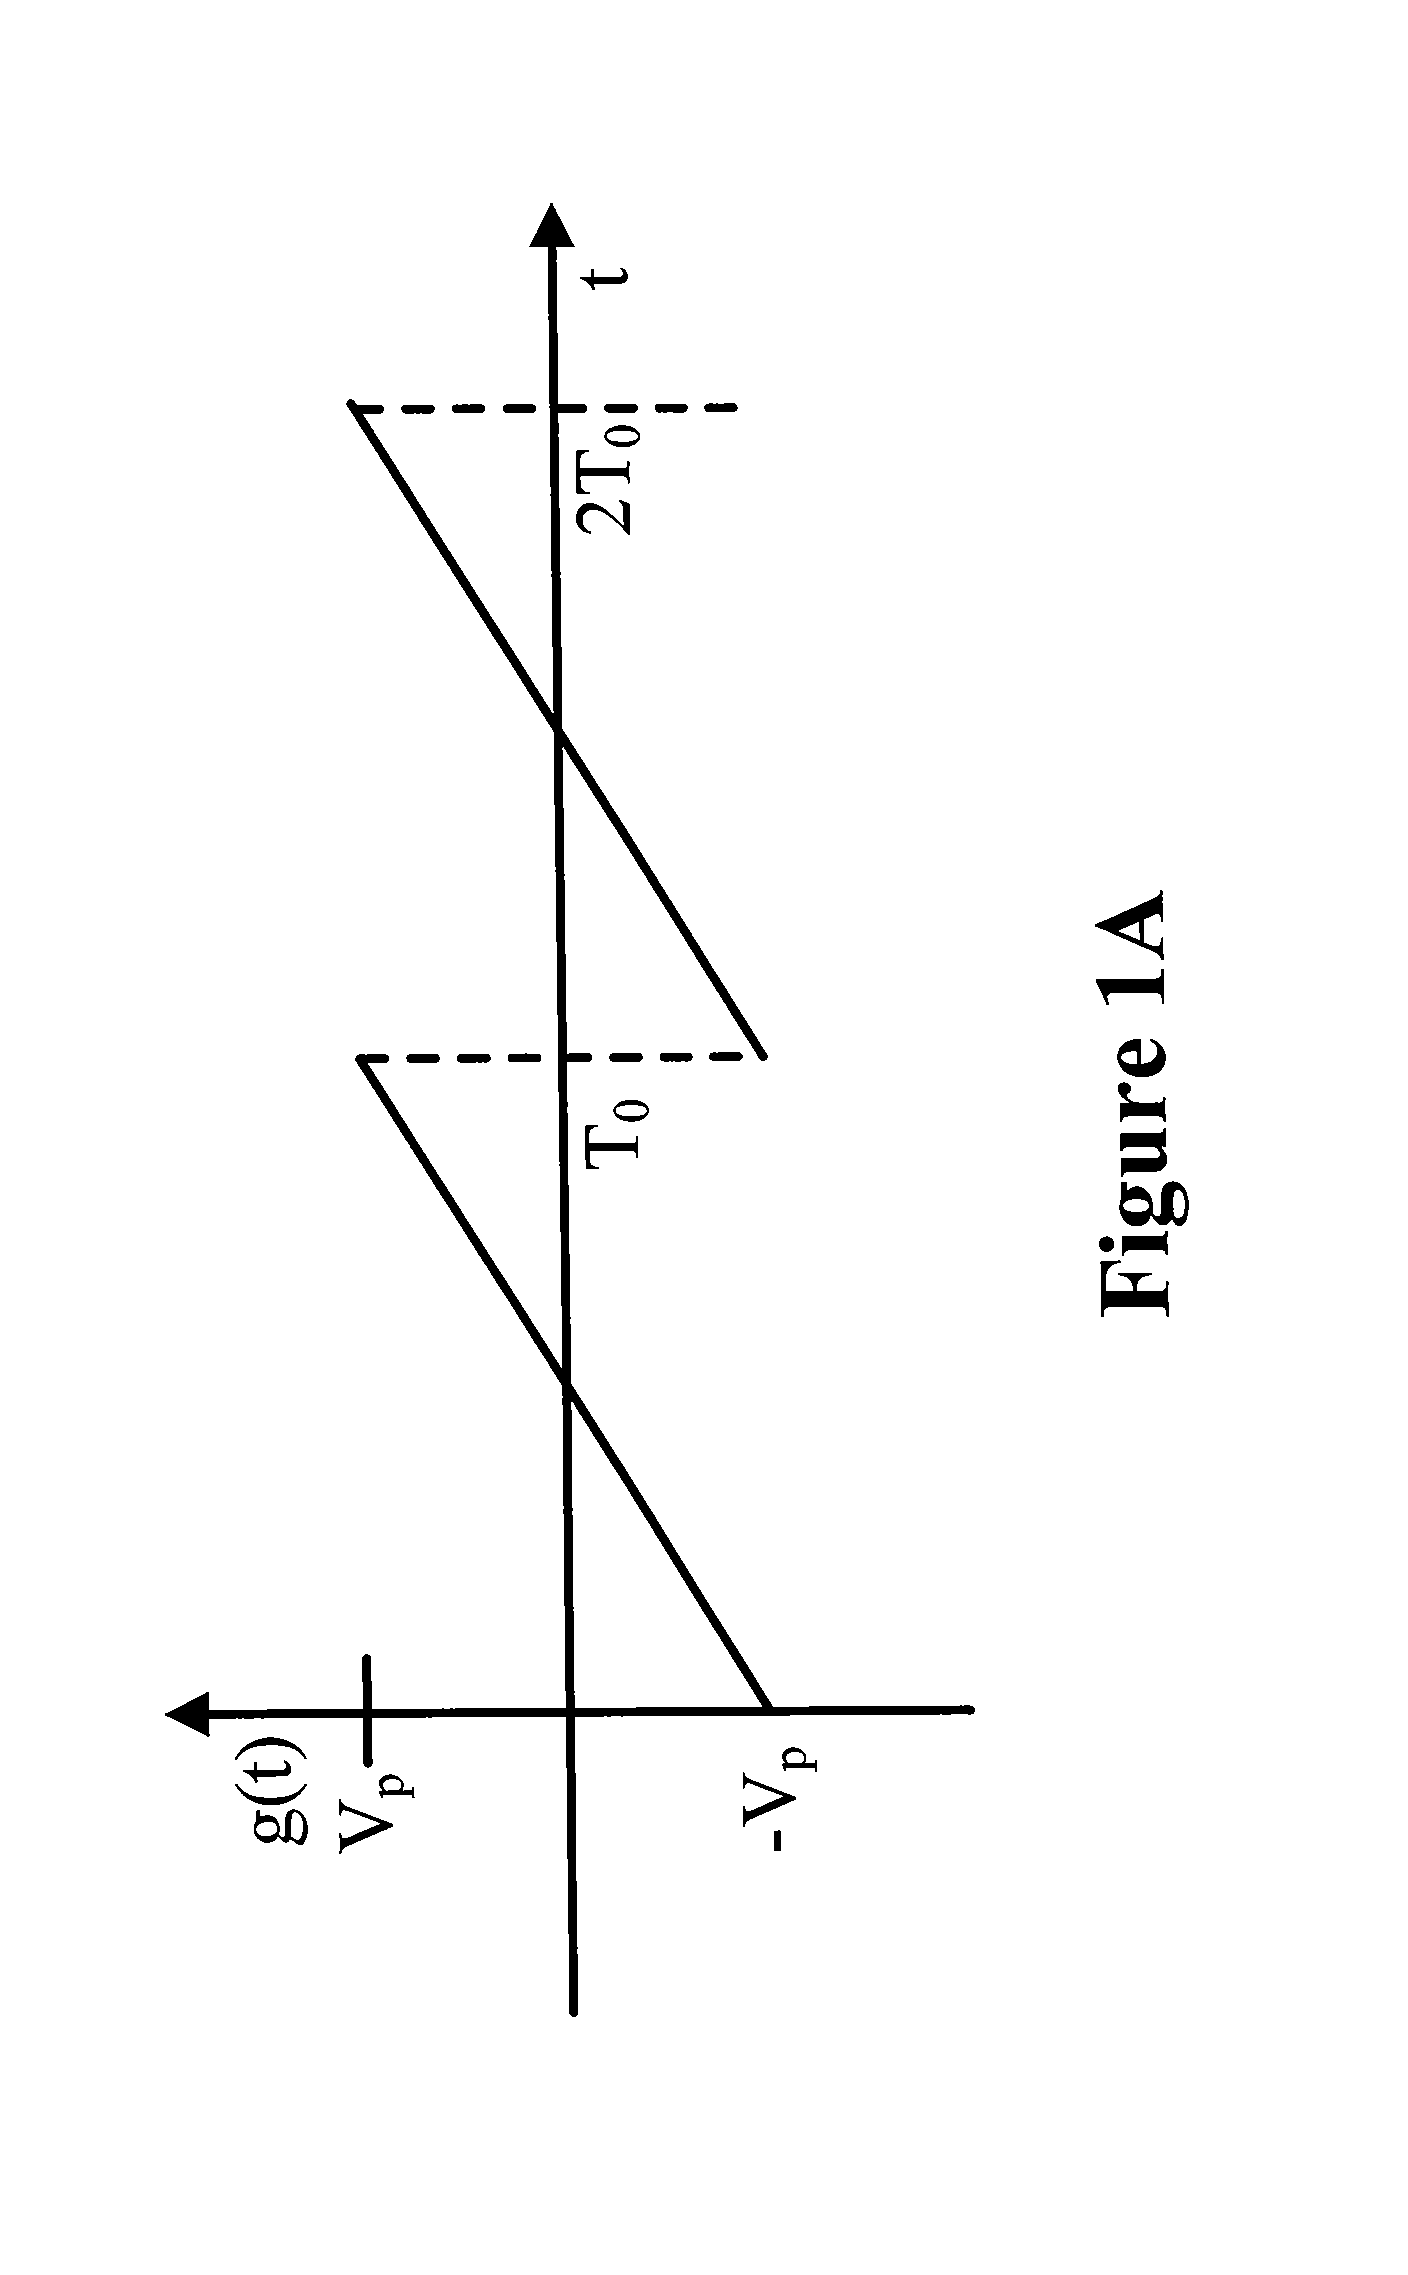 Orthogonal frequency chirp multiple accessing systems and methods